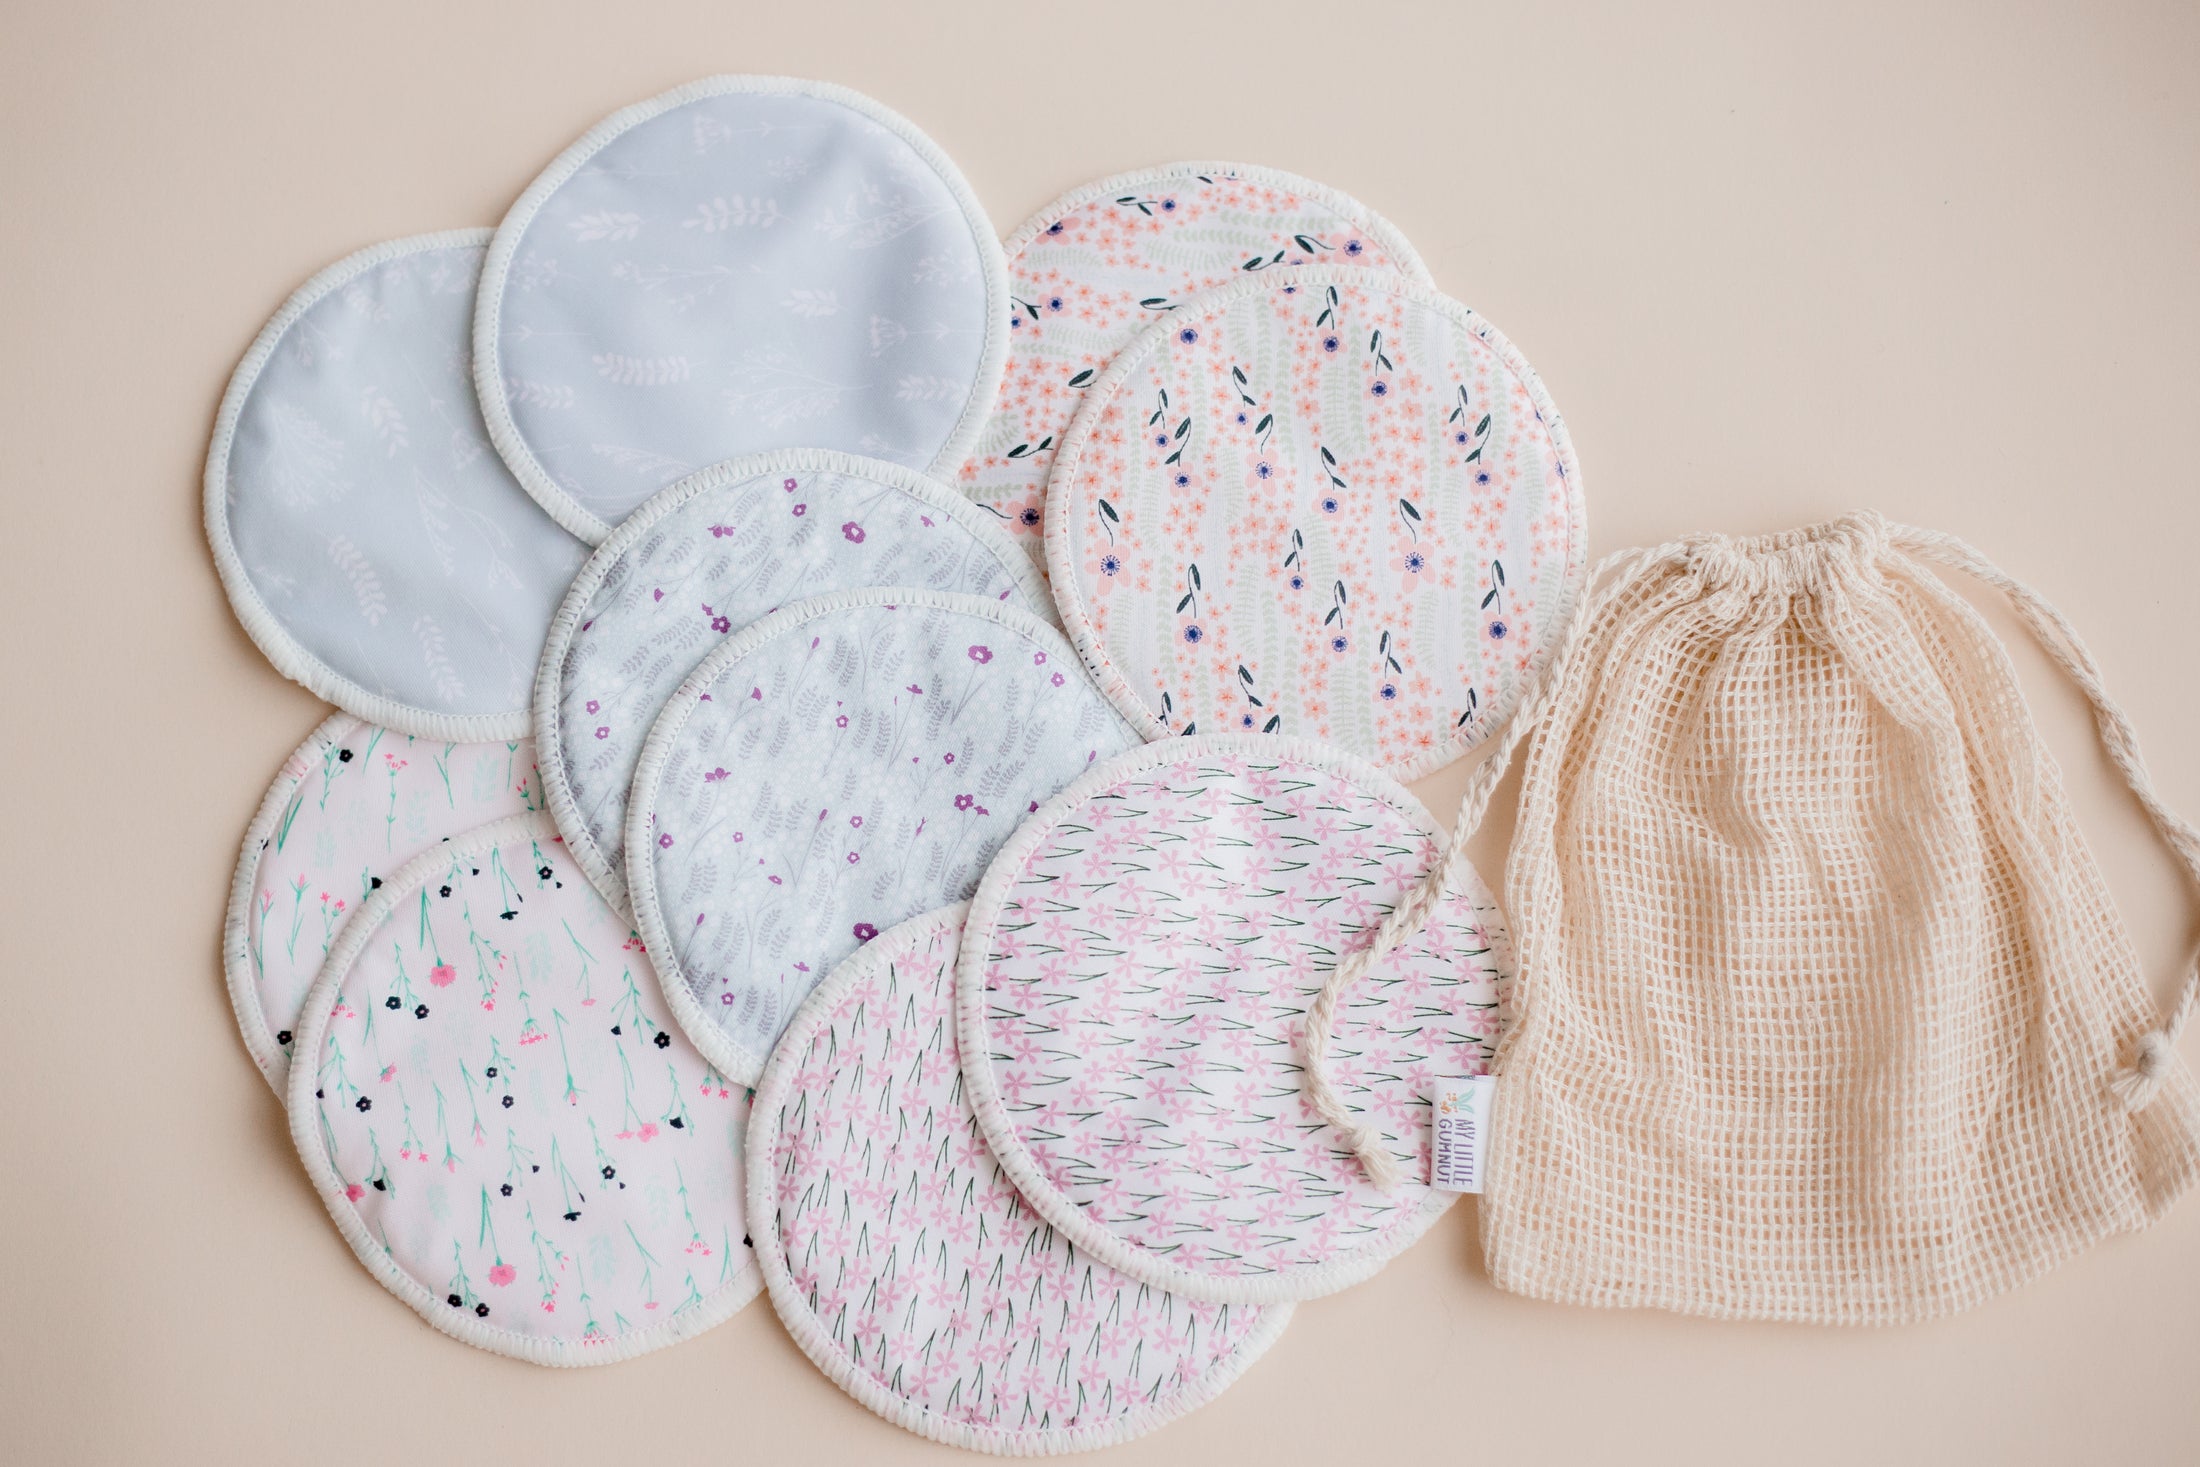 Reusable breast pads